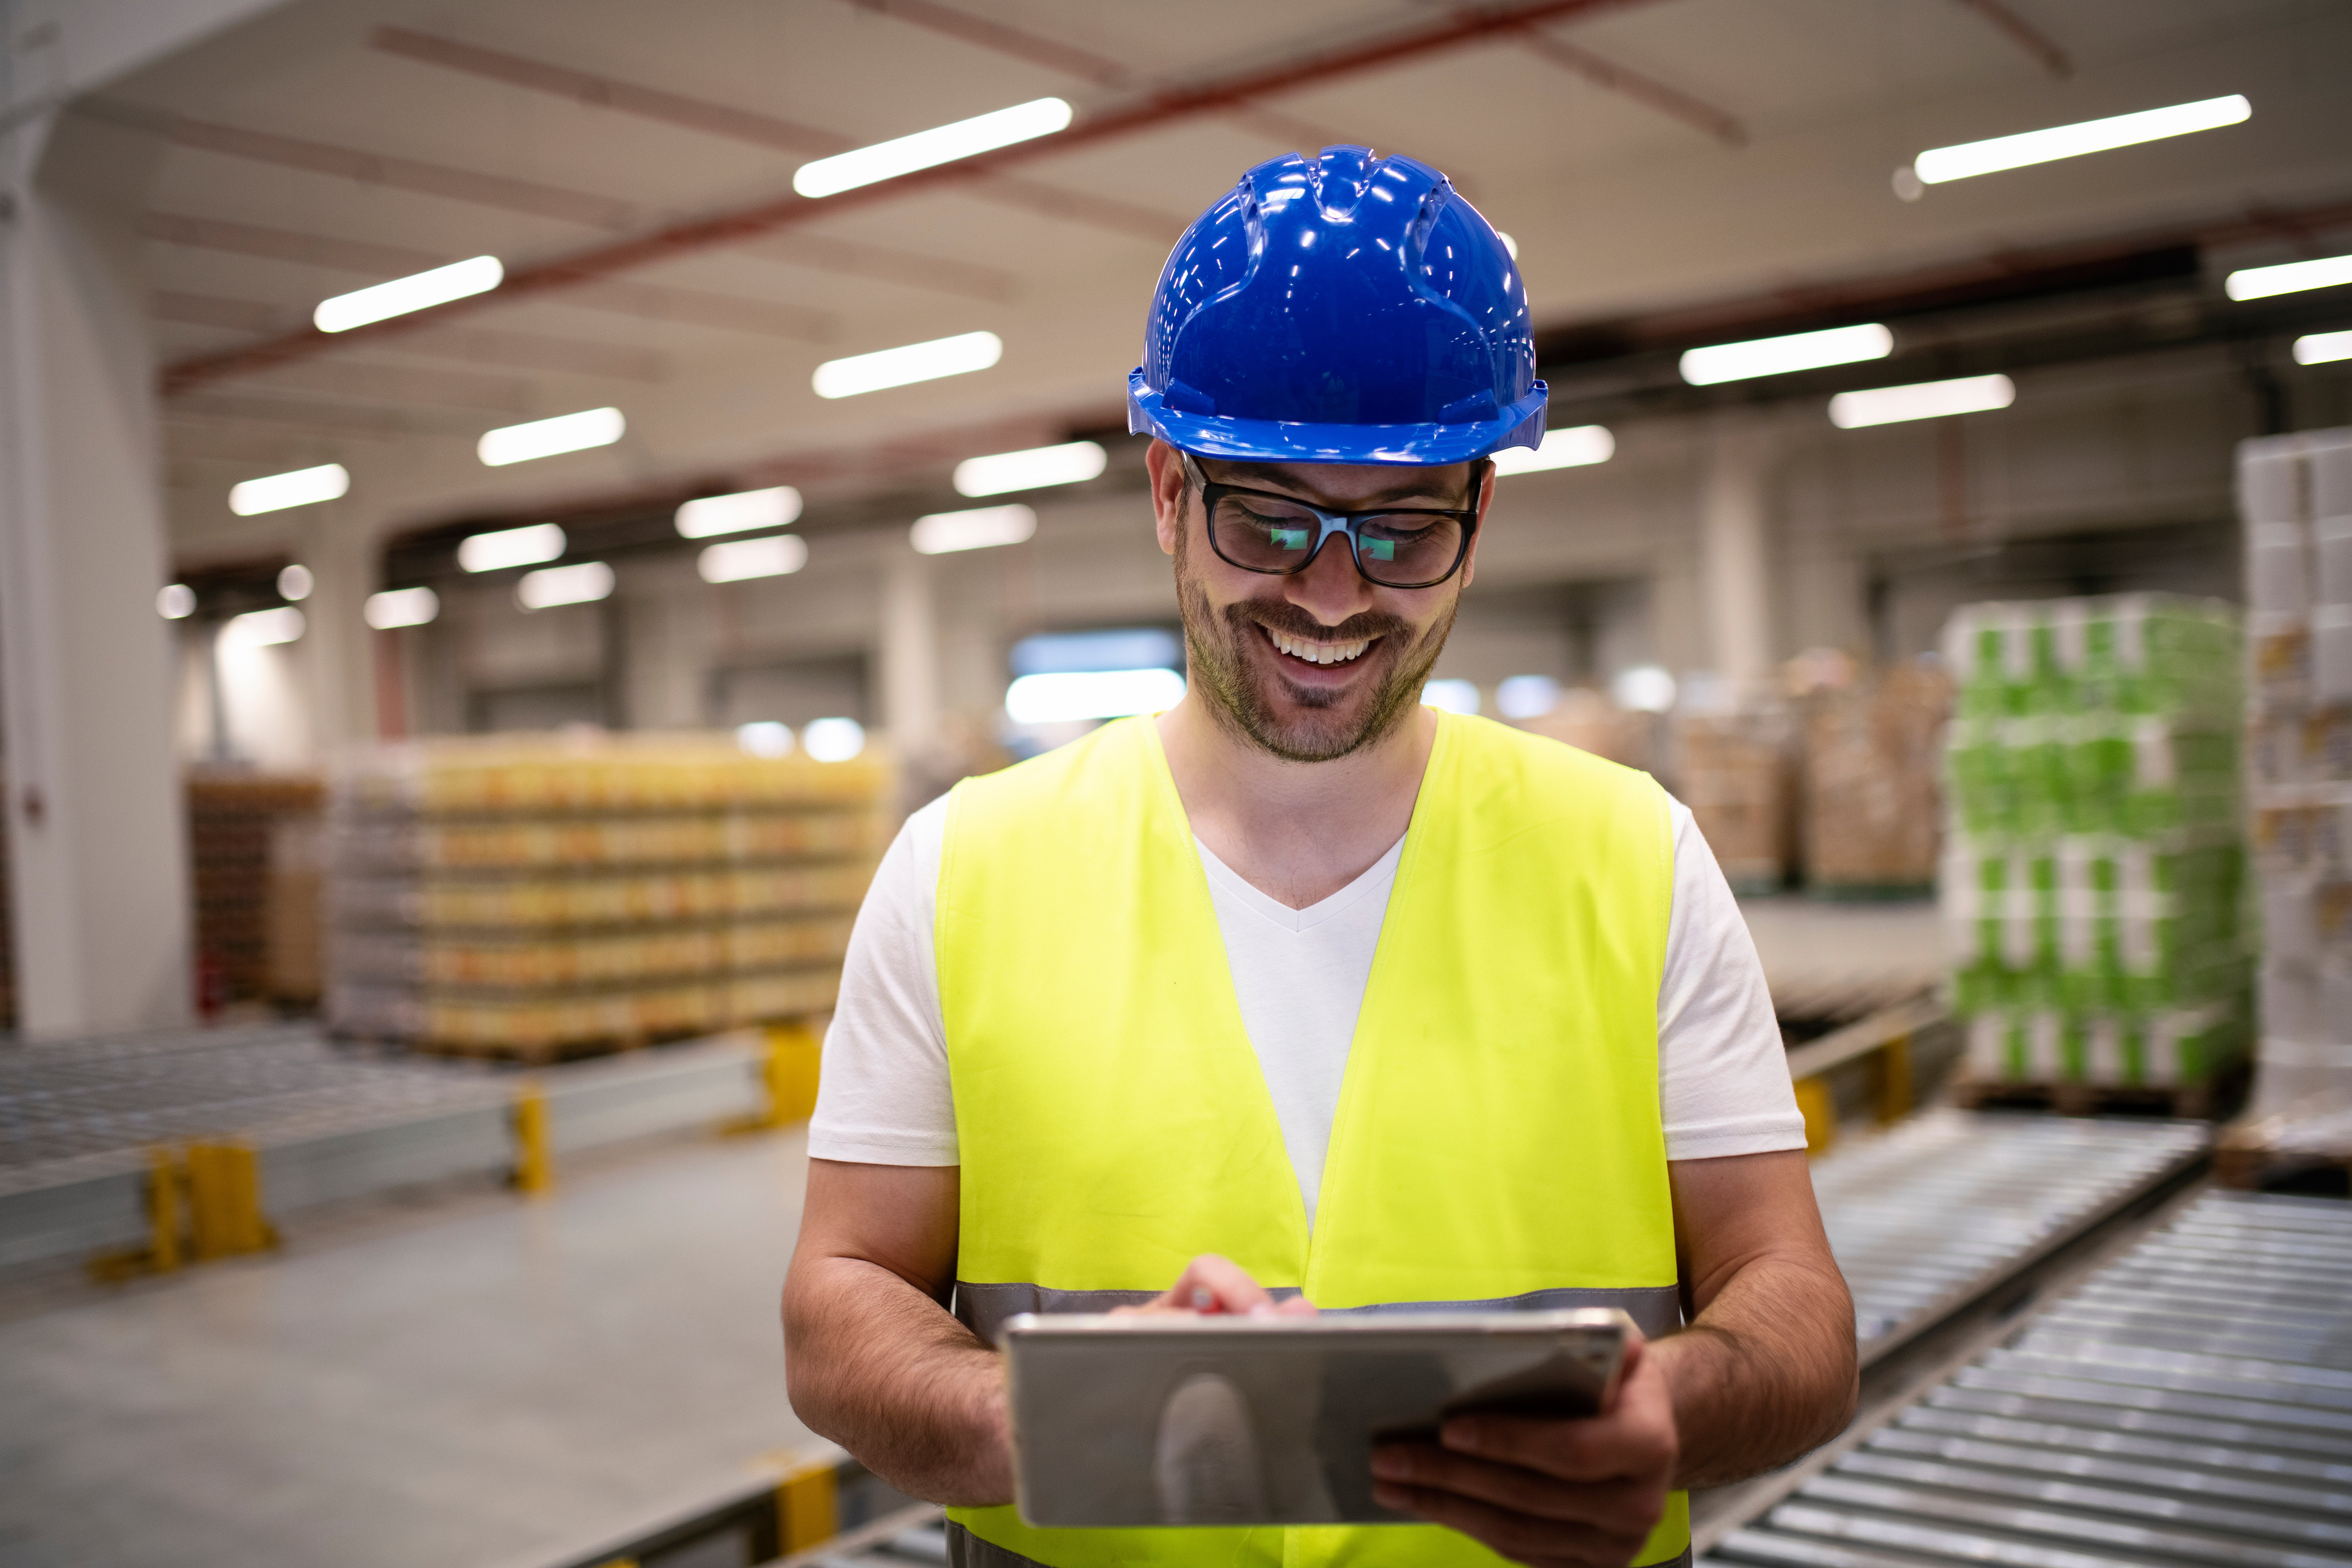 industry-worker-in-reflective-jacket-and-hardhat-looking-at-tablet-in-modern-factory-interior